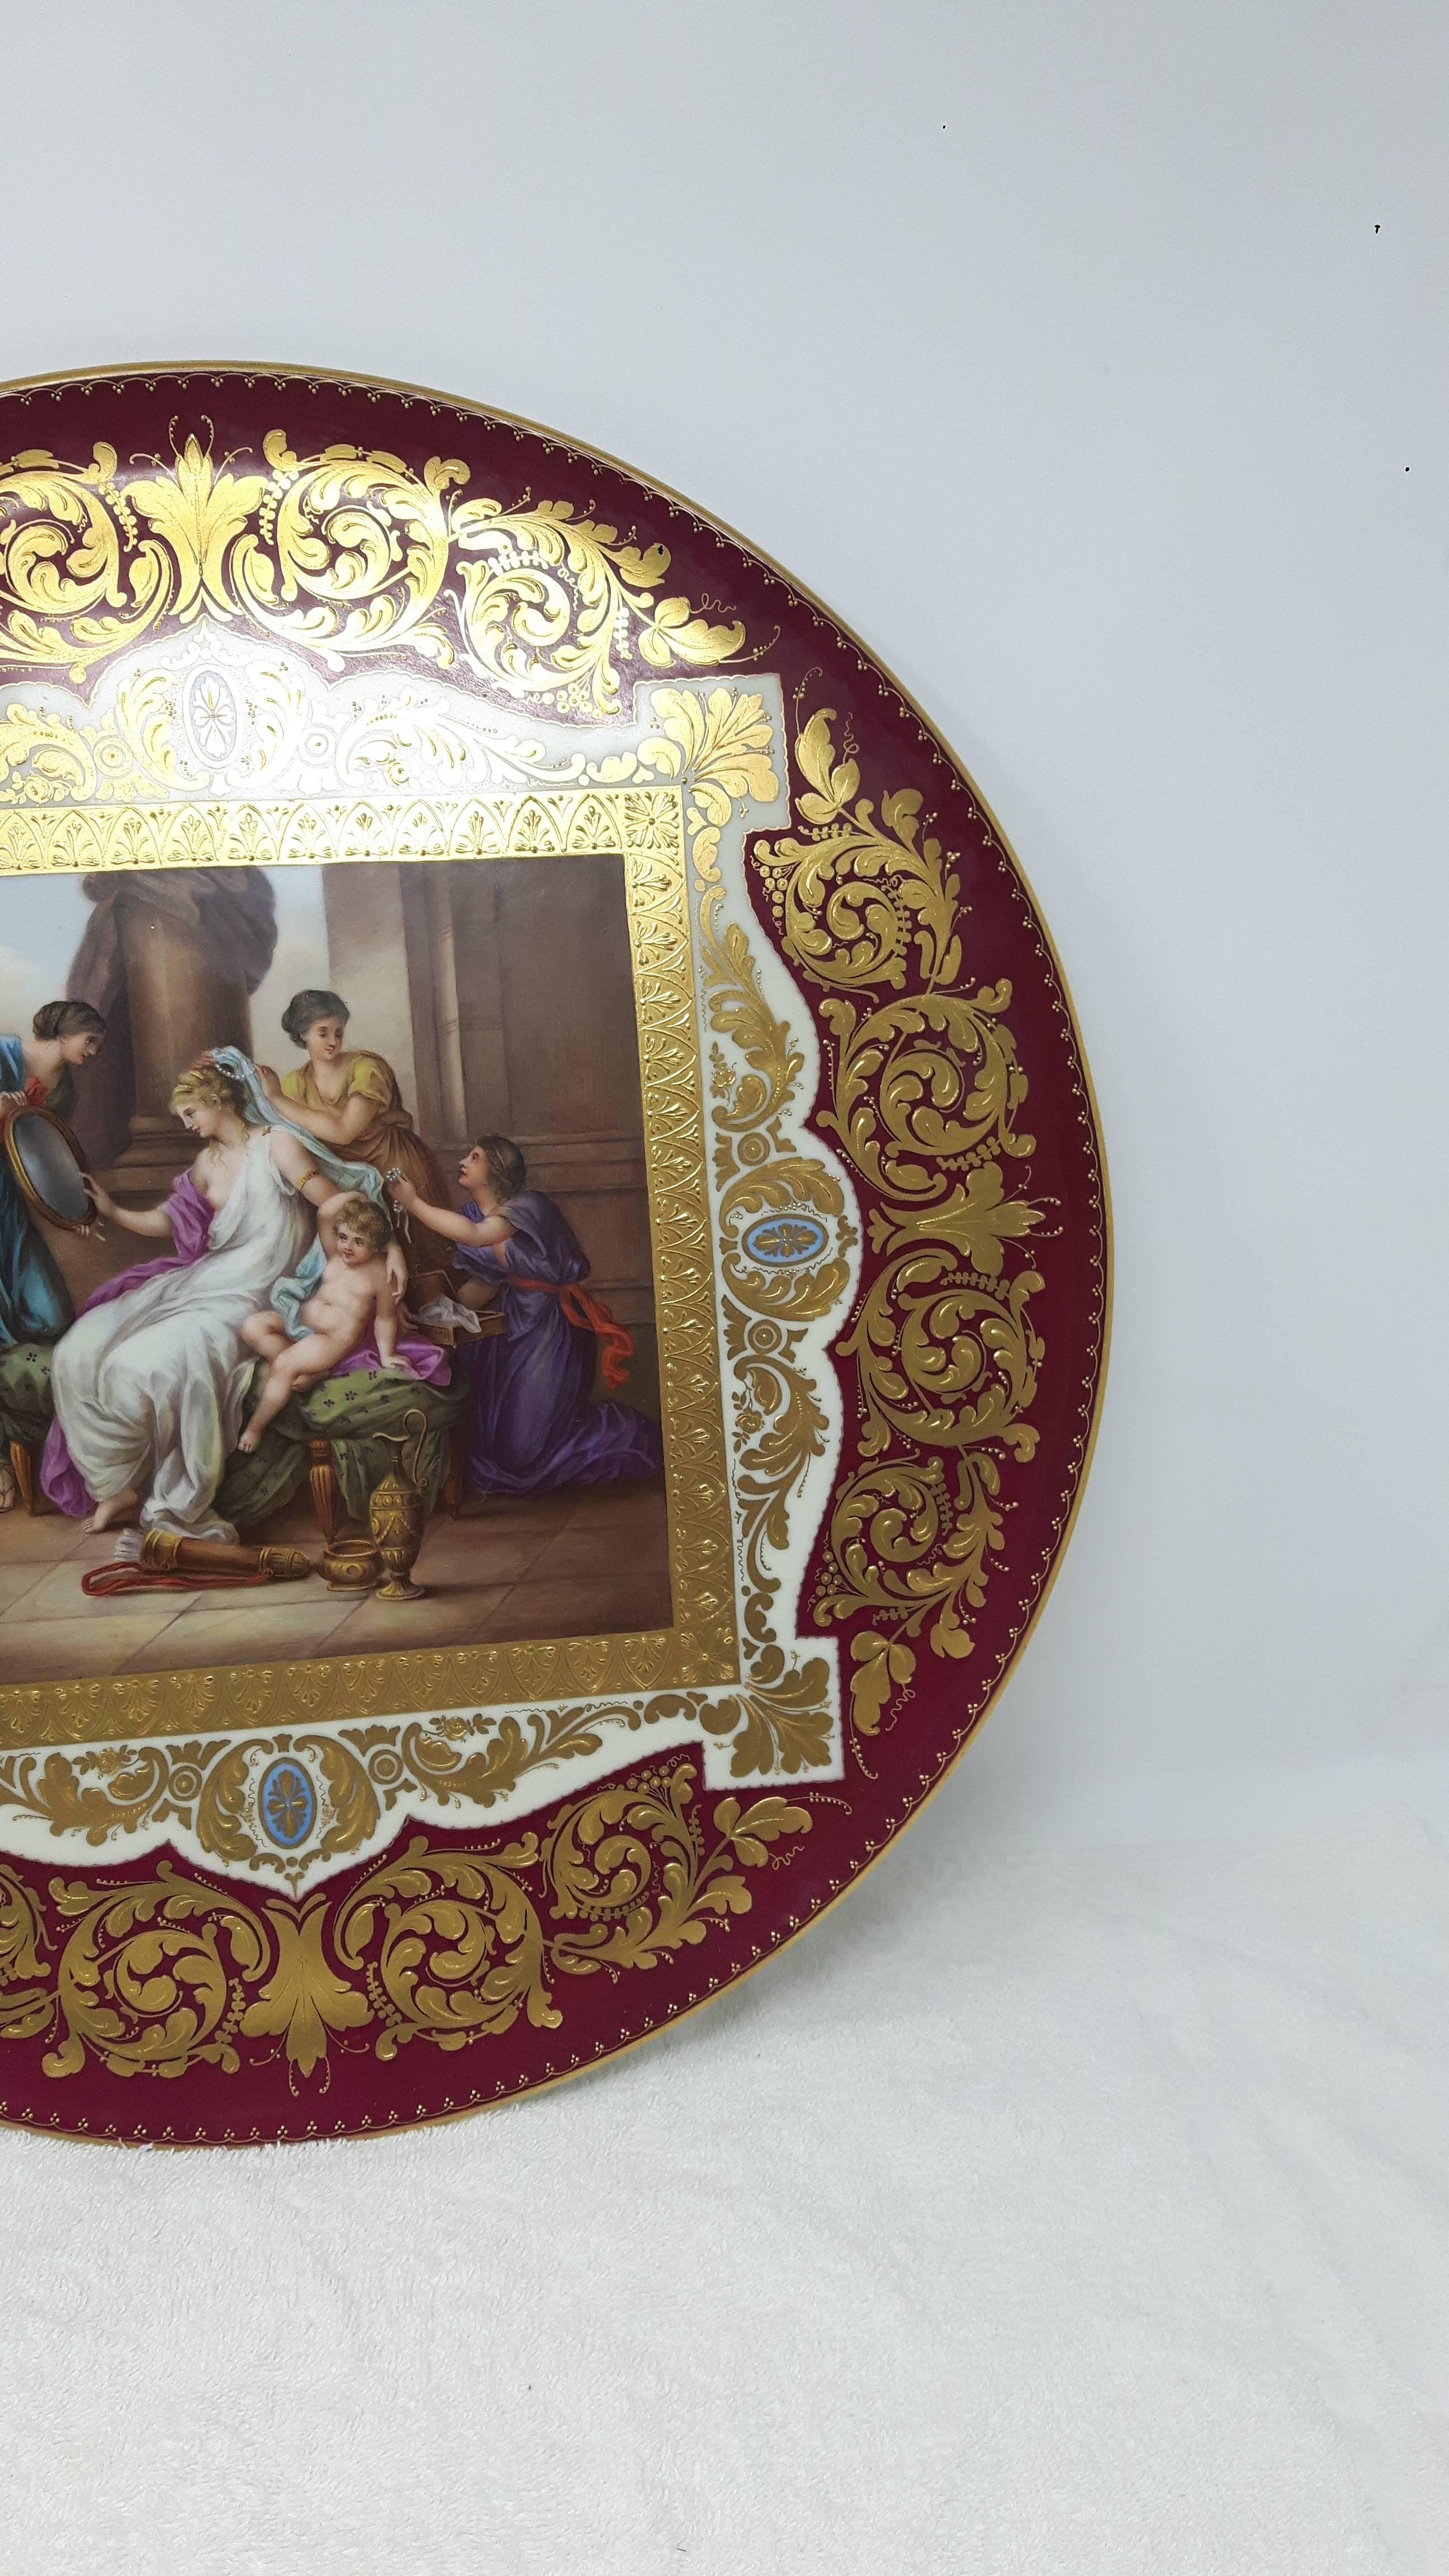 A glamorous Vienna style charger painted with a central panel of 